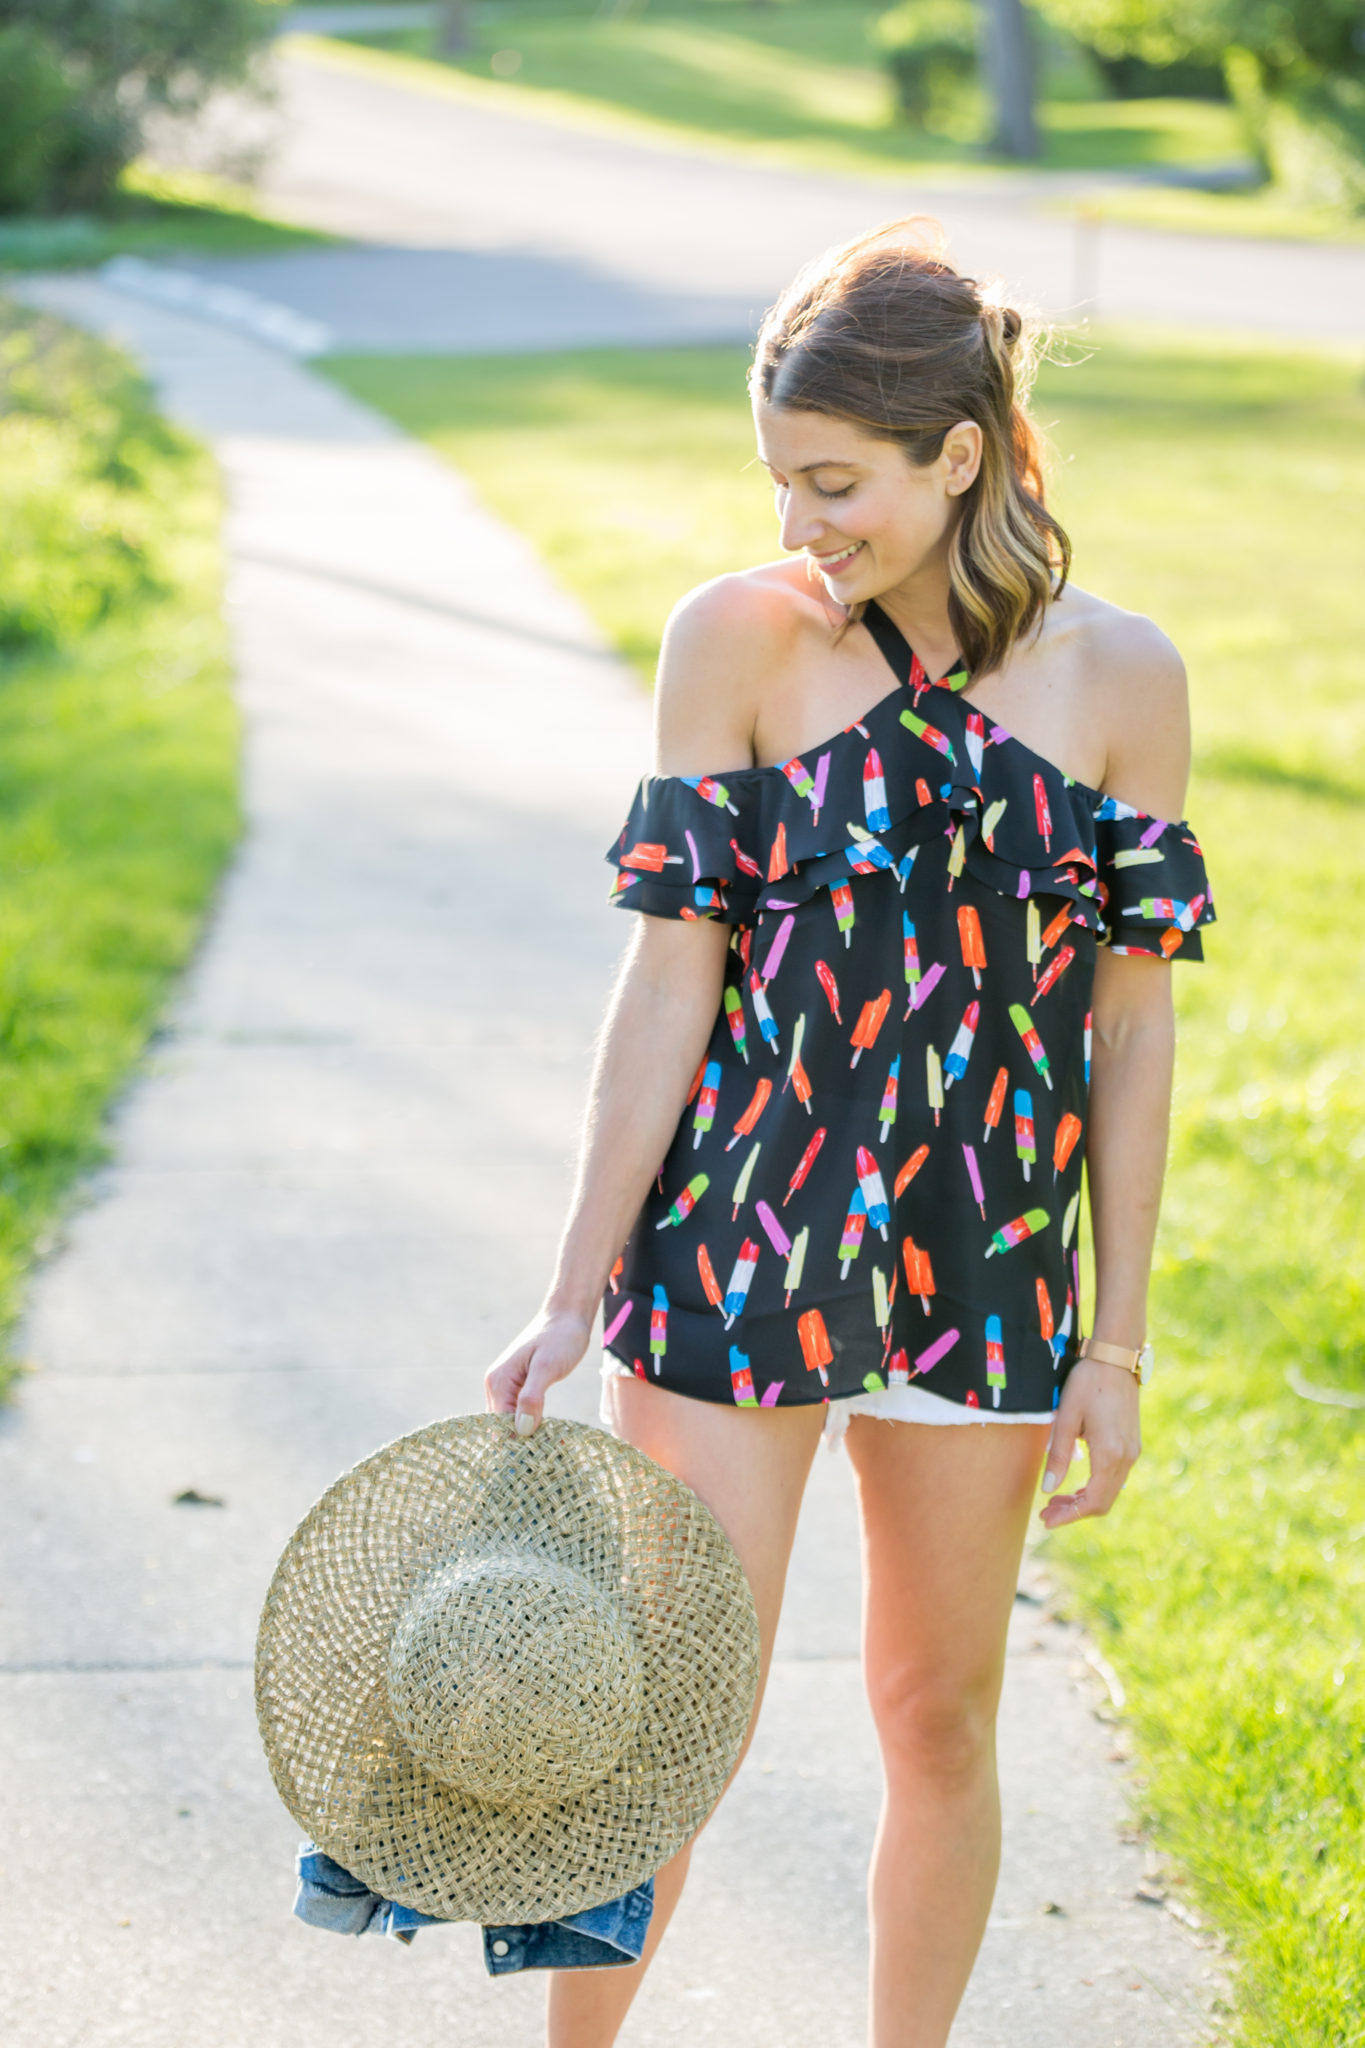 macy's inc and popsicle collaboration | summer style on allweareblog.com